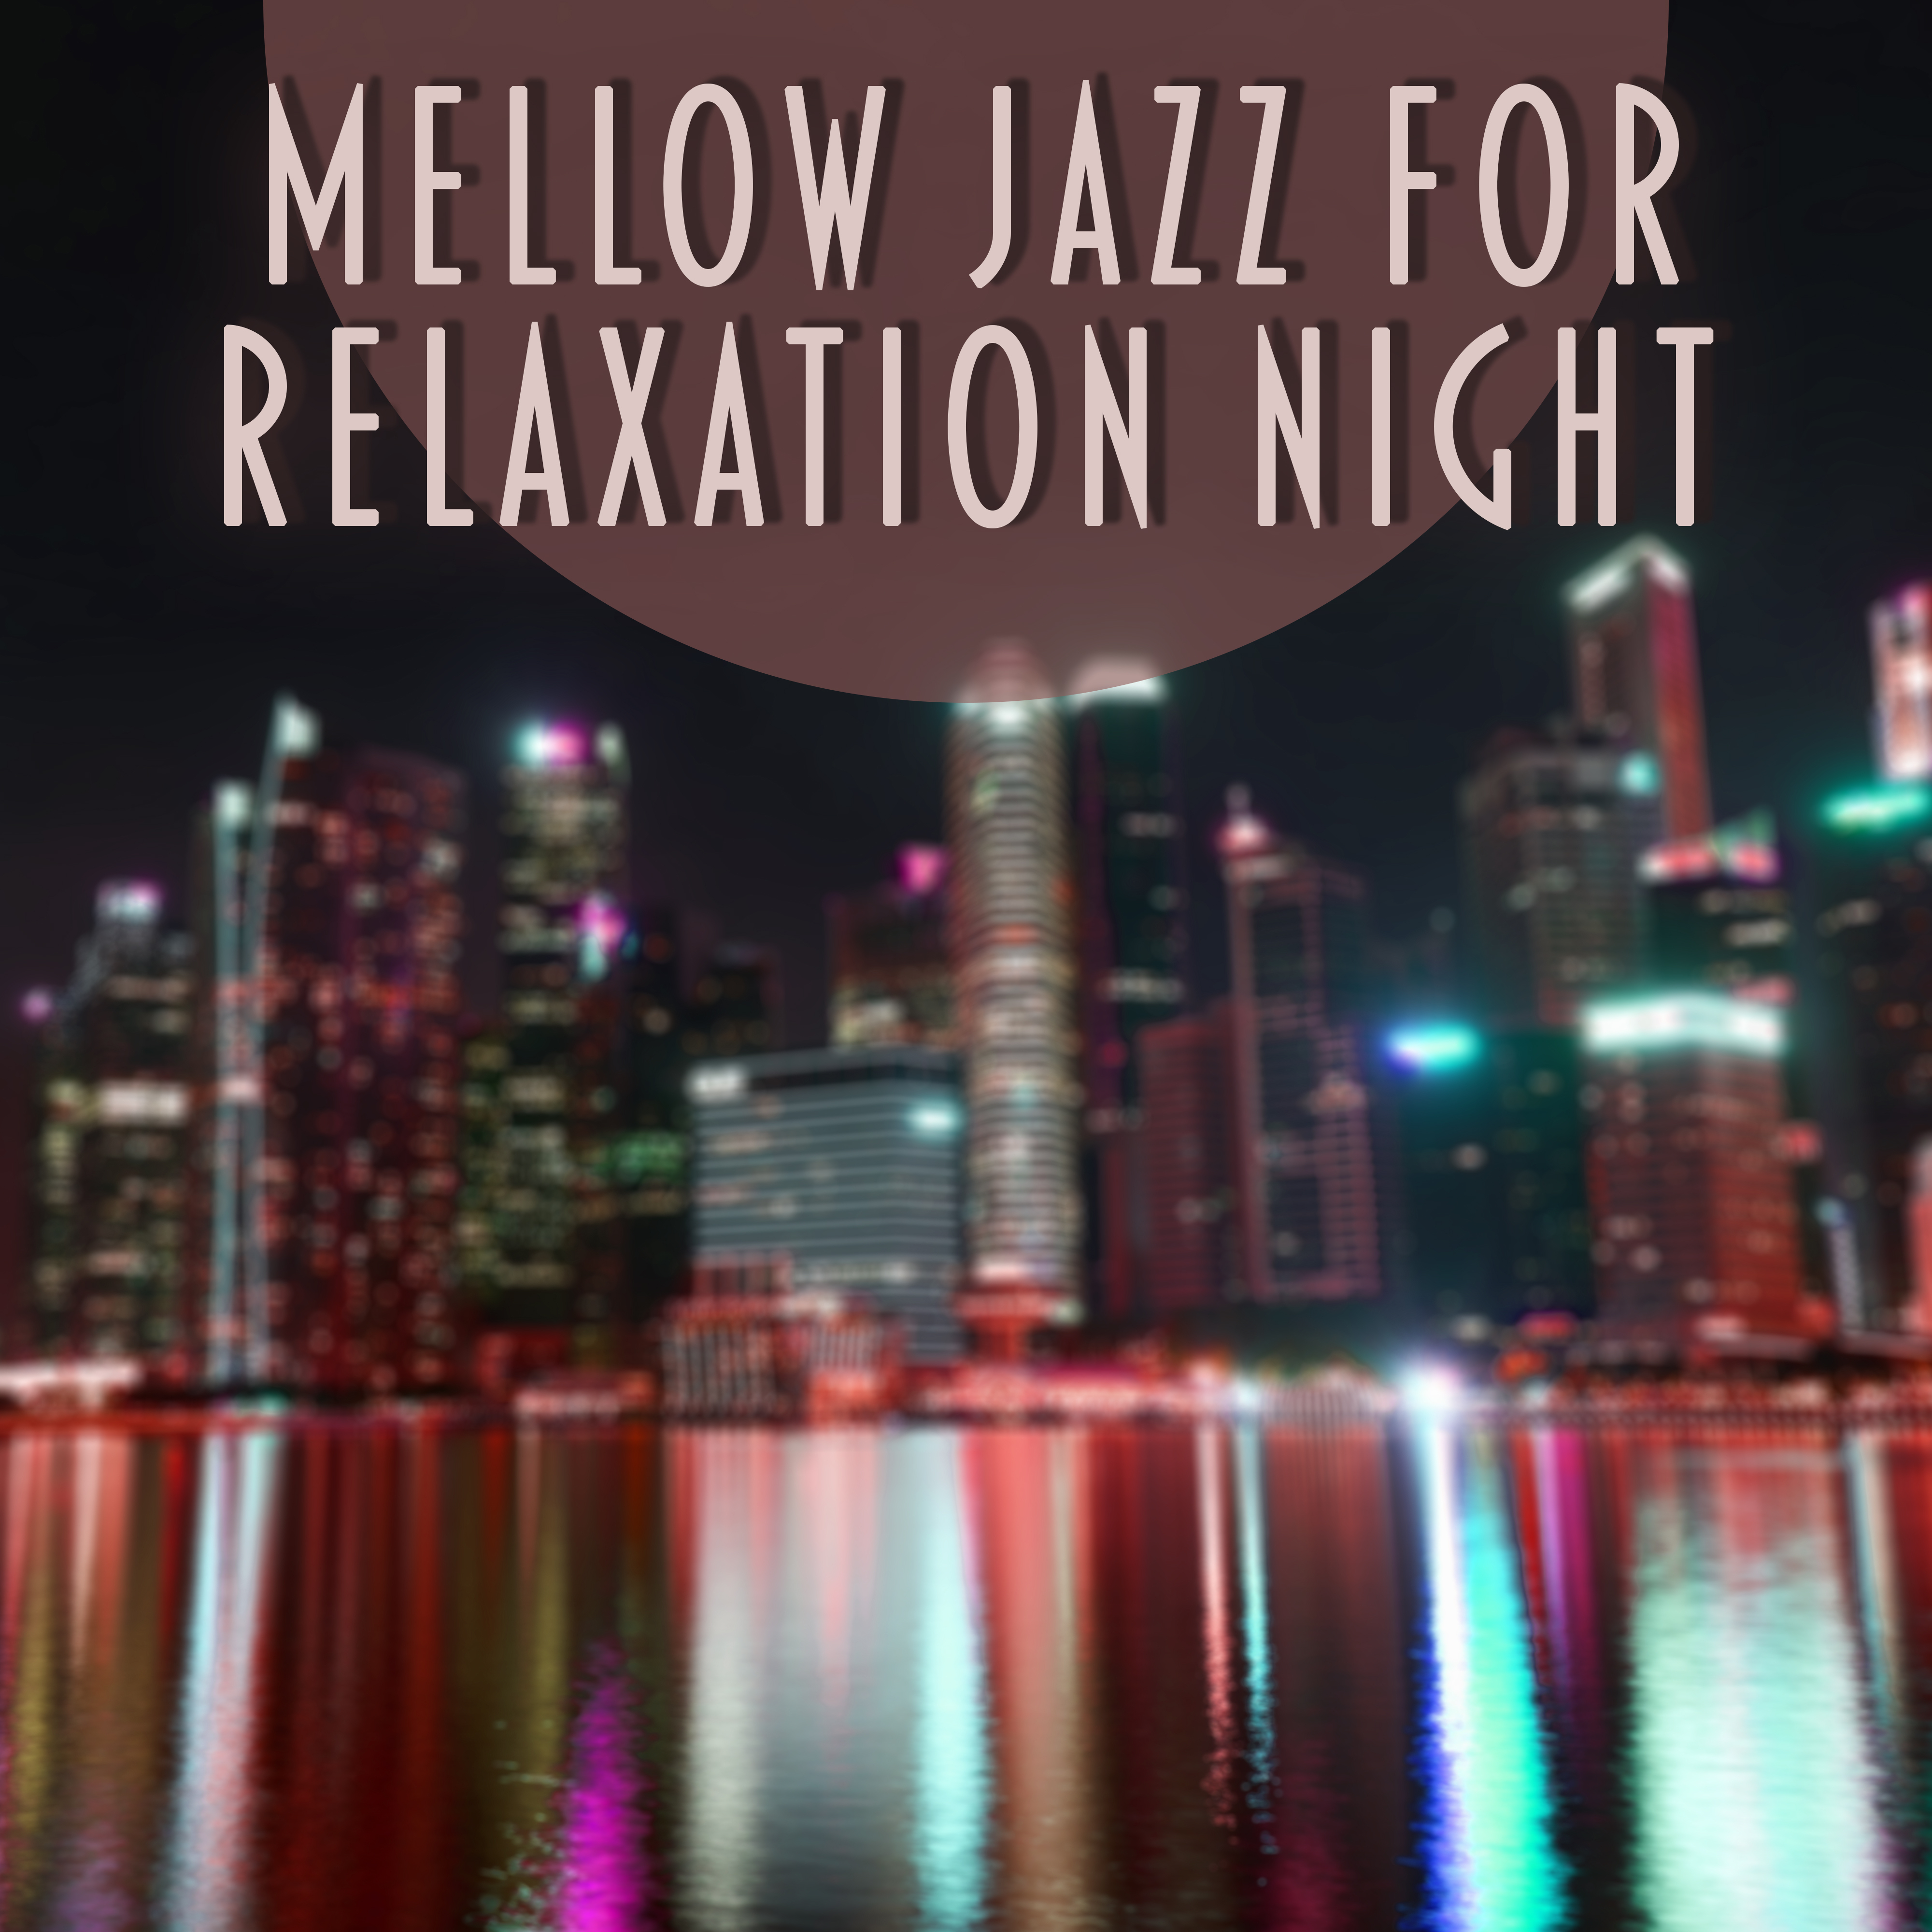 Mellow Jazz for Relaxation Night  Soft Music, Instrumental Songs, Smooth Jazz Sounds, Relaxed Mind